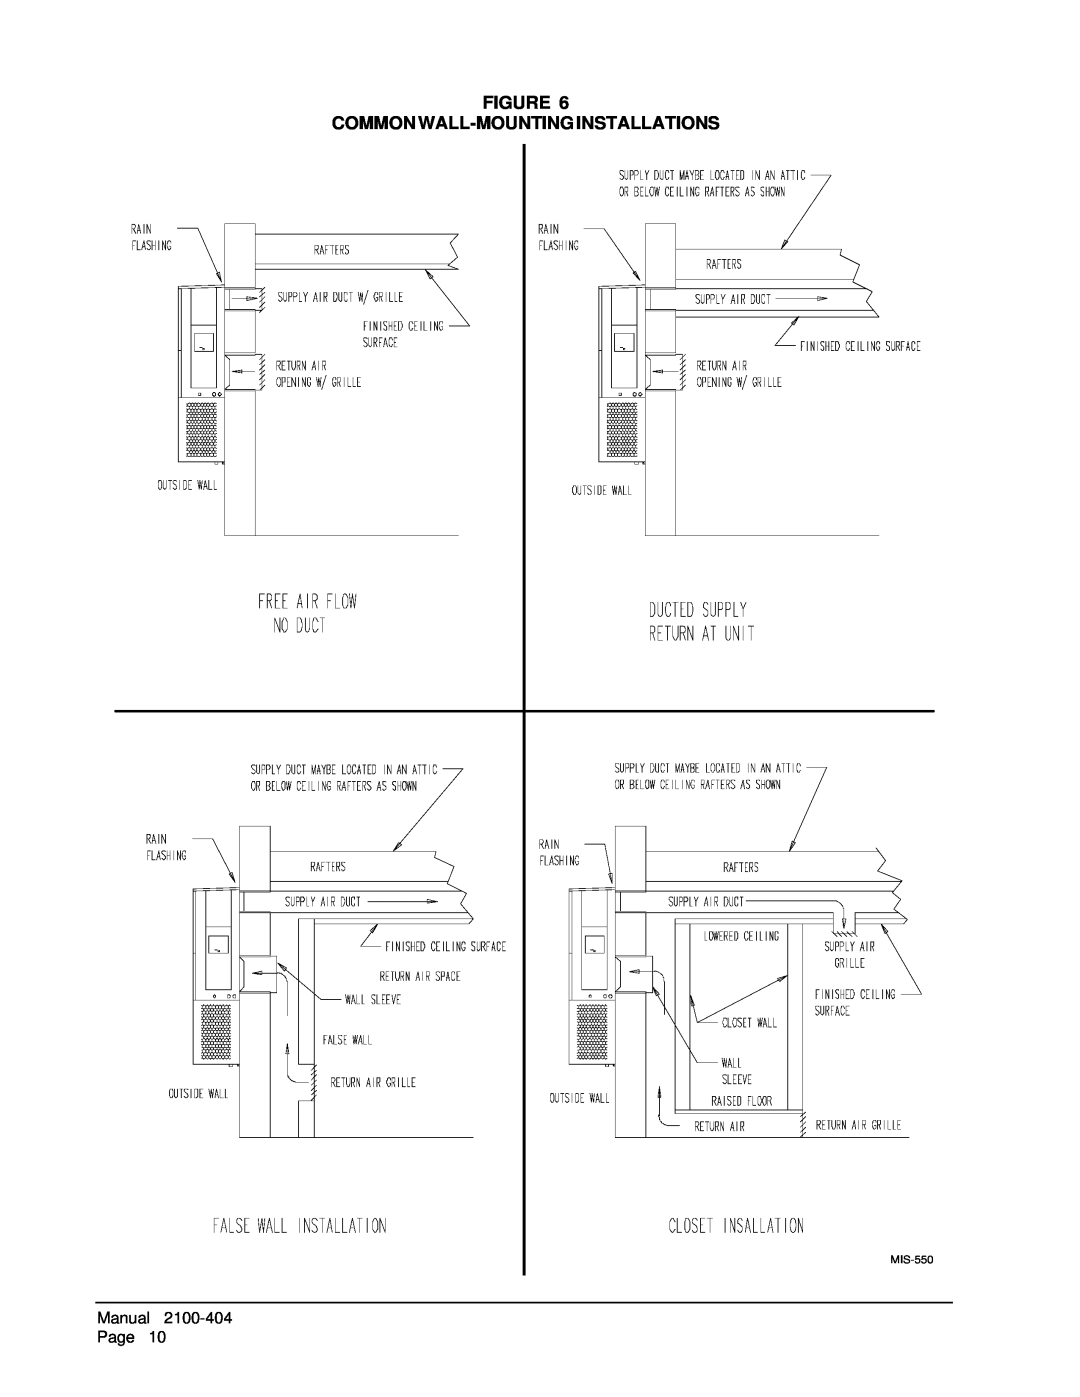 Bard MIS-656 installation instructions Figure Common Wall-Mountinginstallations, Manual, 2100-404, Page, MIS-550 